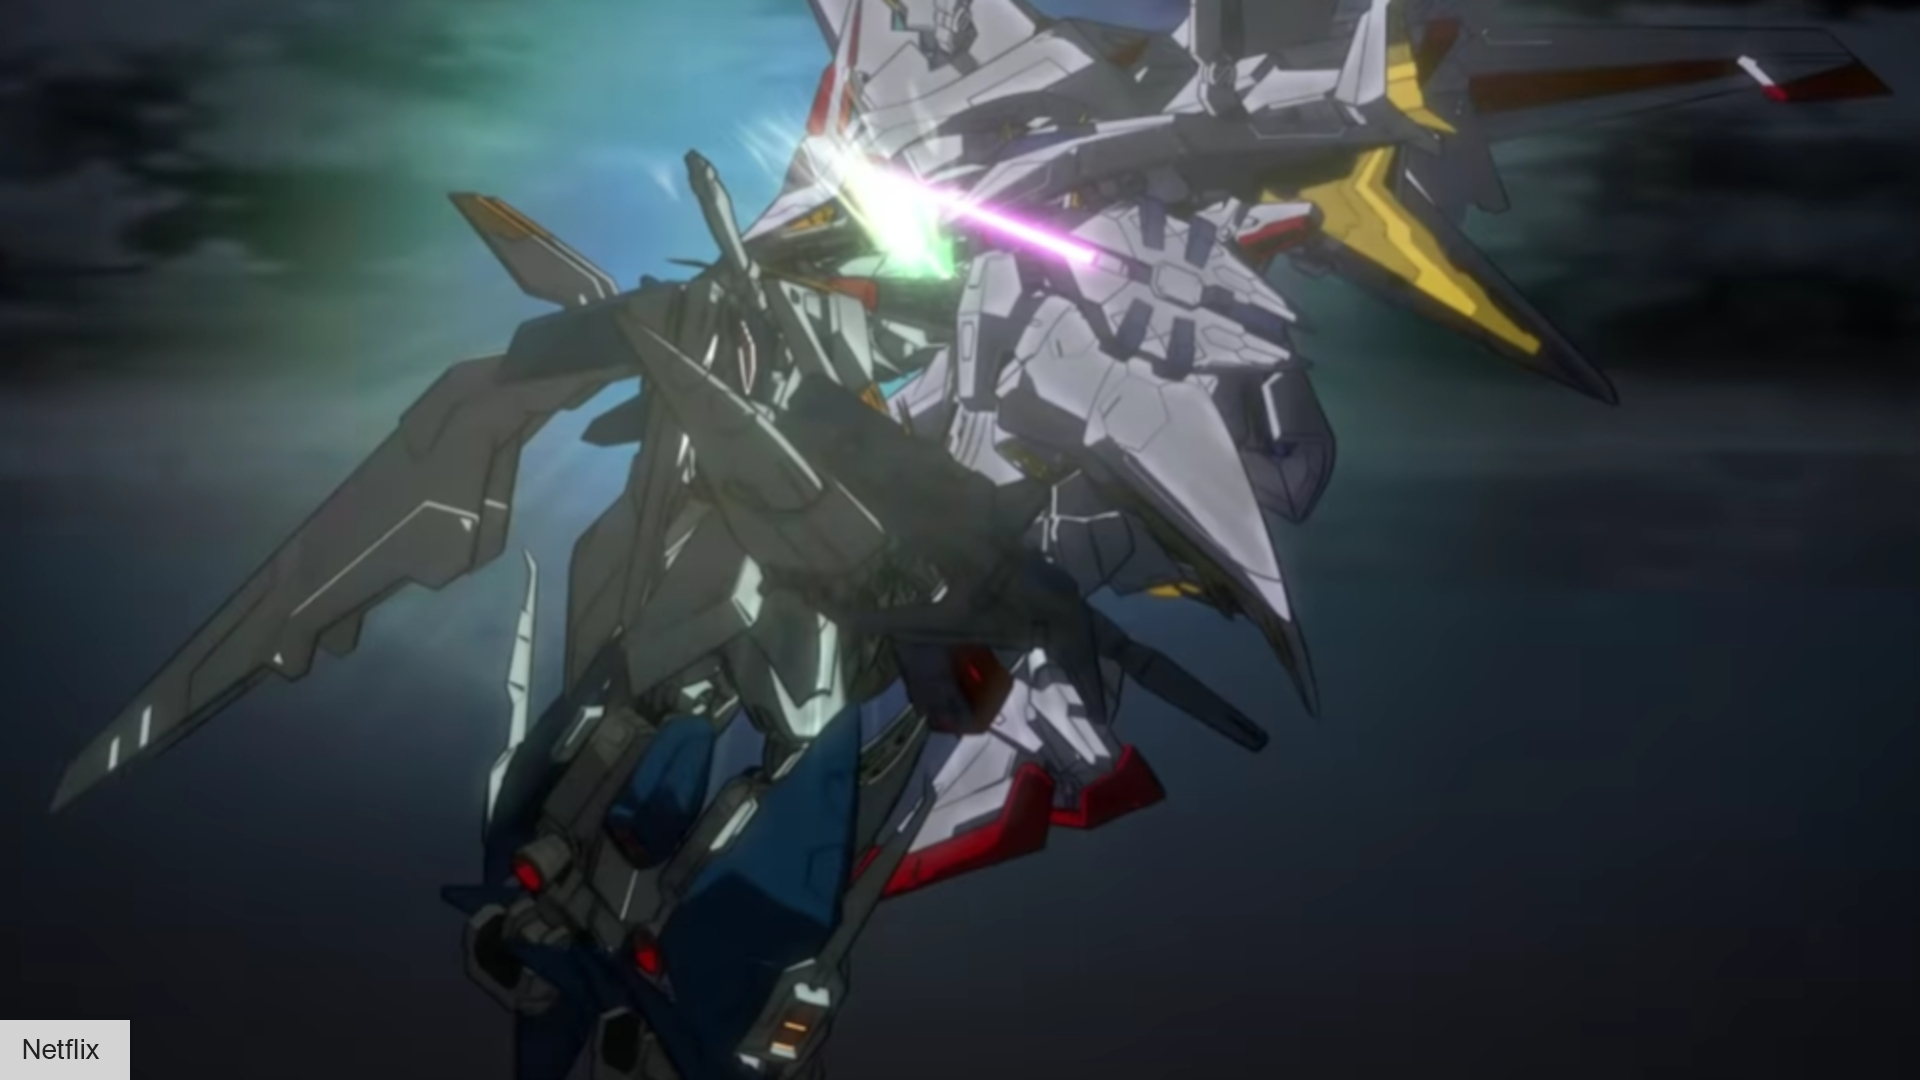 Mobile Suit Gundam: Hathaway coming to Netflix, new trailer released. The Digital Fix